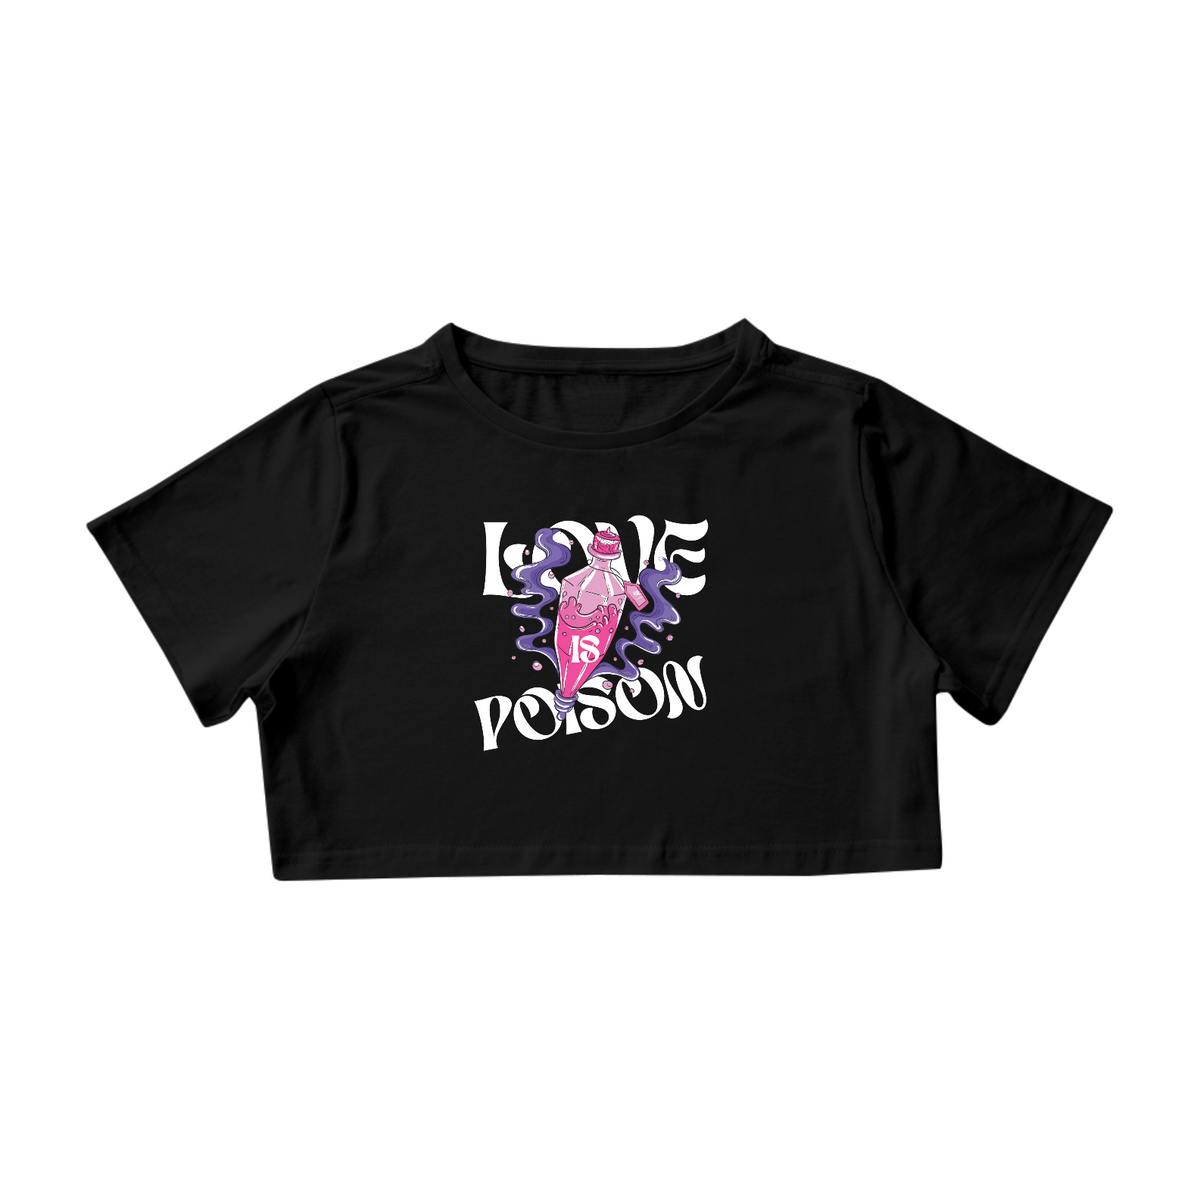 Nome do produto: Cropped Love is Poison